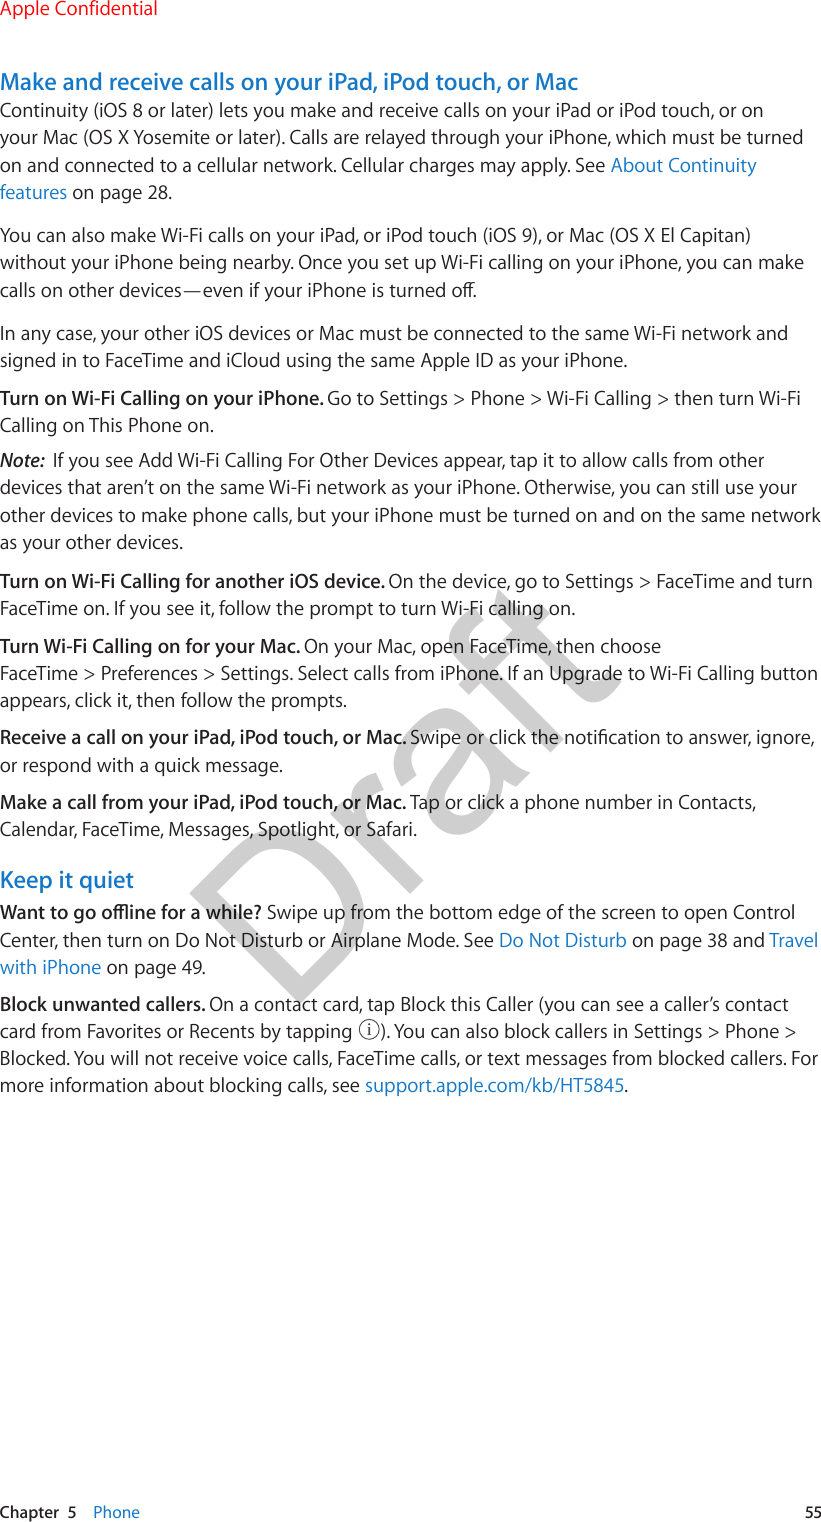 Chapter  5    Phone  55Make and receive calls on your iPad, iPod touch, or MacContinuity (iOS 8 or later) lets you make and receive calls on your iPad or iPod touch, or on your Mac (OS X Yosemite or later). Calls are relayed through your iPhone, which must be turned on and connected to a cellular network. Cellular charges may apply. See About Continuity features on page 28.You can also make Wi-Fi calls on your iPad, or iPod touch (iOS 9), or Mac (OS X El Capitan) without your iPhone being nearby. Once you set up Wi-Fi calling on your iPhone, you can make calls on other devices—even if your iPhone is turned o.In any case, your other iOS devices or Mac must be connected to the same Wi-Fi network and signed in to FaceTime and iCloud using the same Apple ID as your iPhone. Turn on Wi-Fi Calling on your iPhone. Go to Settings &gt; Phone &gt; Wi-Fi Calling &gt; then turn Wi-Fi Calling on This Phone on.Note:  If you see Add Wi-Fi Calling For Other Devices appear, tap it to allow calls from other devices that aren’t on the same Wi-Fi network as your iPhone. Otherwise, you can still use your other devices to make phone calls, but your iPhone must be turned on and on the same network as your other devices.Turn on Wi-Fi Calling for another iOS device. On the device, go to Settings &gt; FaceTime and turn FaceTime on. If you see it, follow the prompt to turn Wi-Fi calling on.Turn Wi-Fi Calling on for your Mac. On your Mac, open FaceTime, then choose FaceTime &gt; Preferences &gt; Settings. Select calls from iPhone. If an Upgrade to Wi-Fi Calling button appears, click it, then follow the prompts.Receive a call on your iPad, iPod touch, or Mac. Swipe or click the notication to answer, ignore, or respond with a quick message.Make a call from your iPad, iPod touch, or Mac. Tap or click a phone number in Contacts, Calendar, FaceTime, Messages, Spotlight, or Safari.Keep it quietWant to go oine for a while? Swipe up from the bottom edge of the screen to open Control Center, then turn on Do Not Disturb or Airplane Mode. See Do Not Disturb on page 38 and Travel with iPhone on page 49.Block unwanted callers. On a contact card, tap Block this Caller (you can see a caller’s contact card from Favorites or Recents by tapping  ). You can also block callers in Settings &gt; Phone &gt; Blocked. You will not receive voice calls, FaceTime calls, or text messages from blocked callers. For more information about blocking calls, see support.apple.com/kb/HT5845.Apple ConfidentialDraft